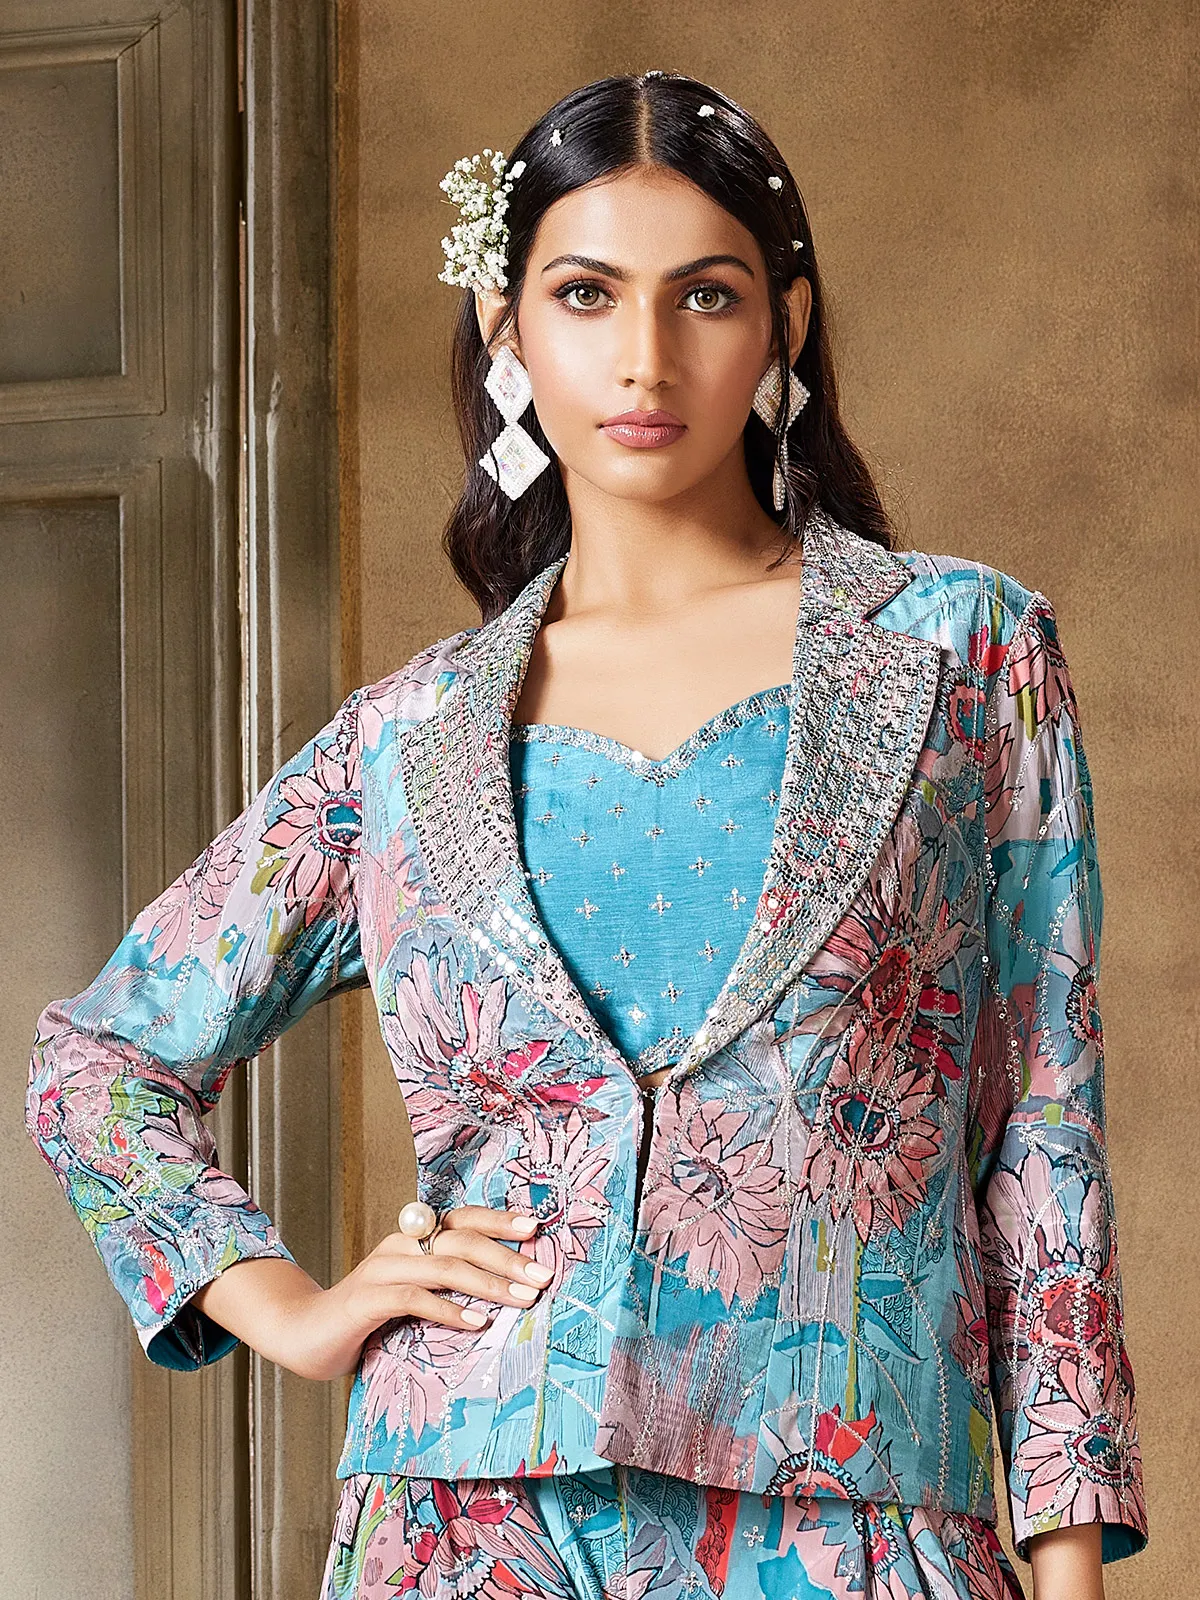 Jacket style printed sky blue palazzo suit